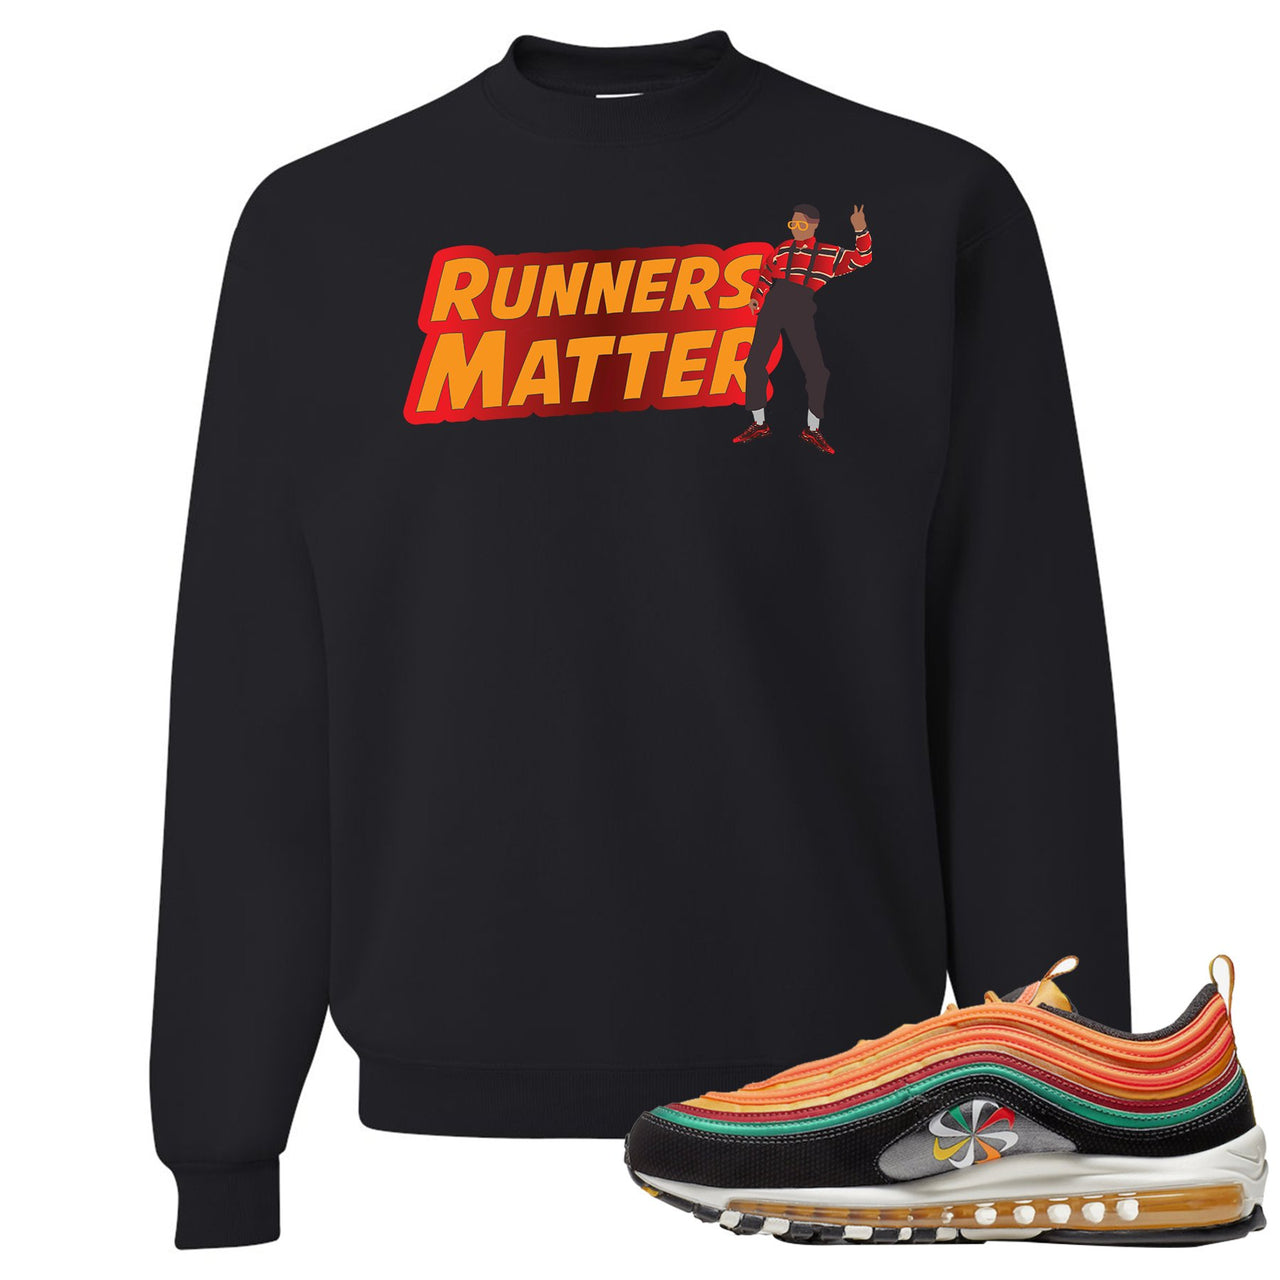 Printed on the front of the Air Max 97 Sunburst black sneaker matching crewneck is the Runners Matter logo